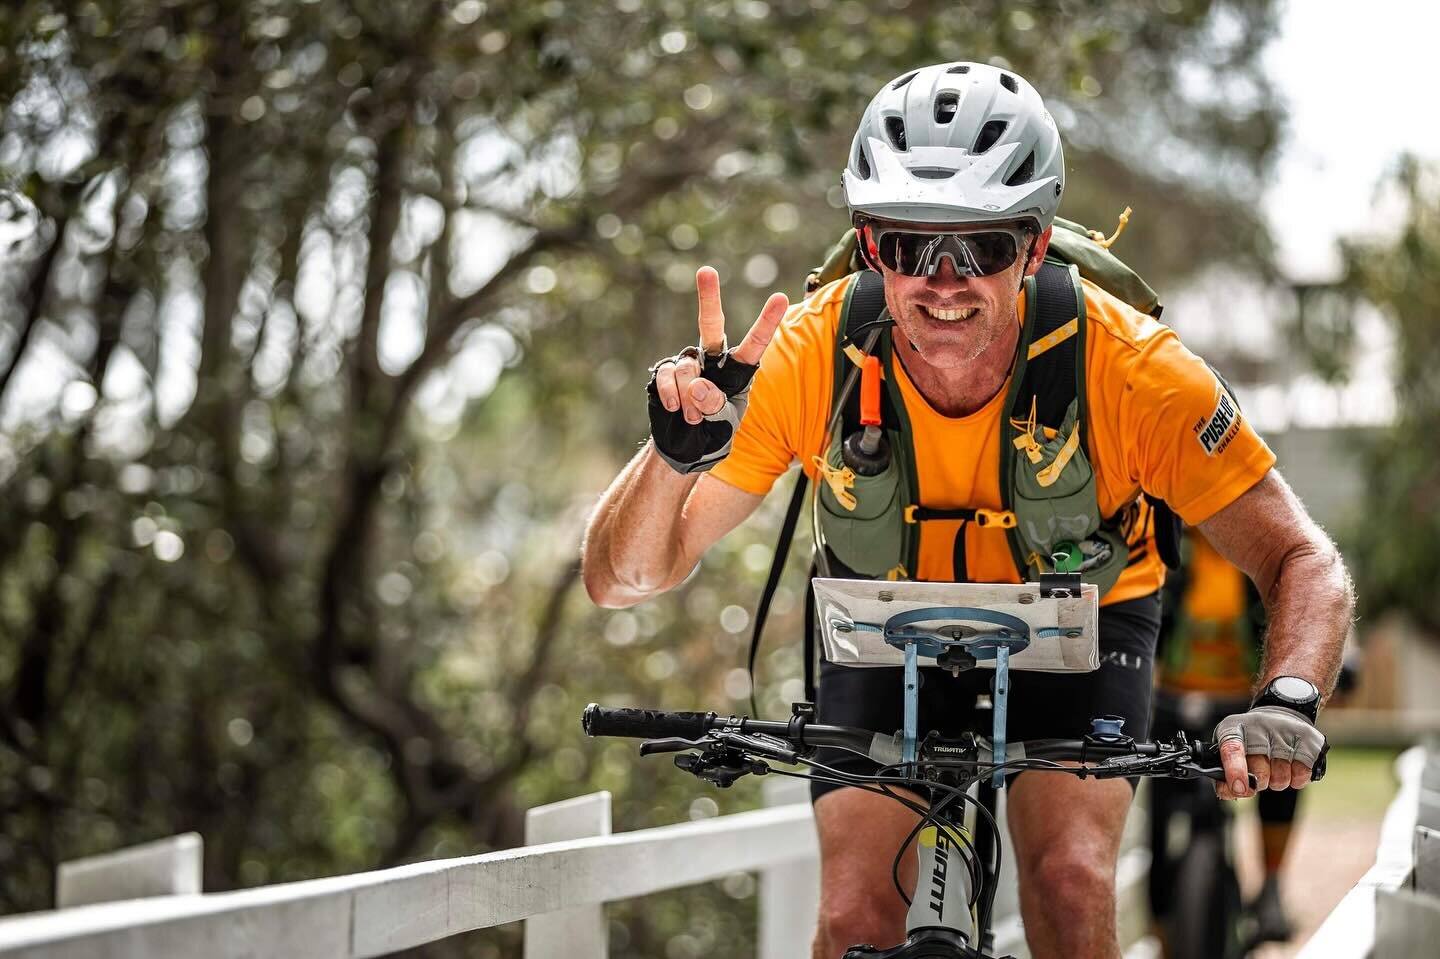 6hr adventure races are where it&rsquo;s at!! Check out these awesome pics of the recent Brisbane South event. Canberra is next up!

#hellsbells #terranova24 #geoquest #xpd #adventureracing #adventure #traillife #getoutside #outdoorlife #explore #get